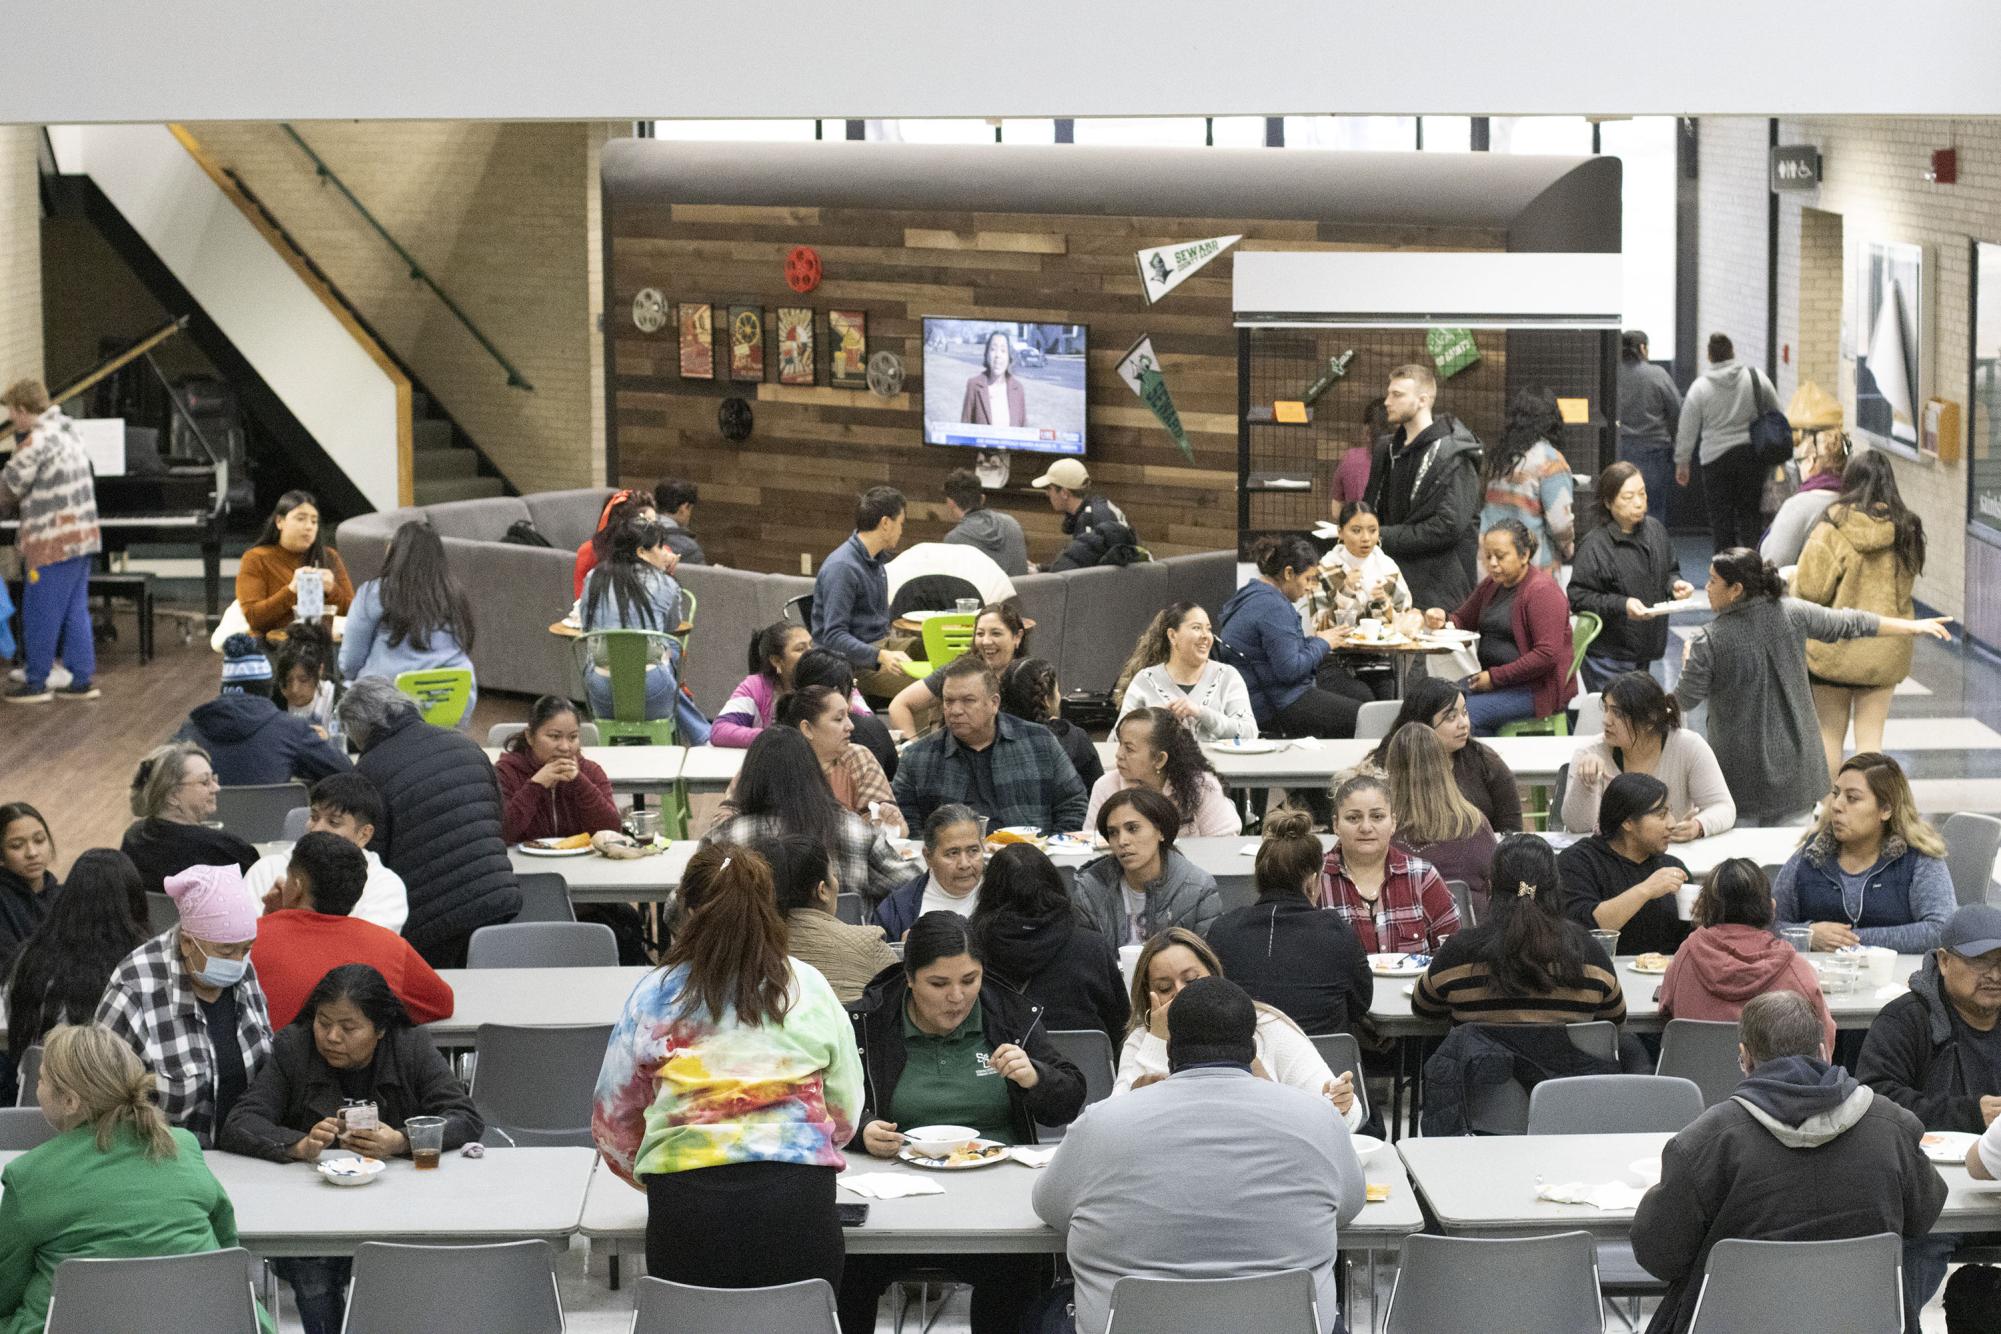 People talking at their tables, eating plates of diverse food at The Student Union. The food available included various rice, pasta, meats, and drinks.